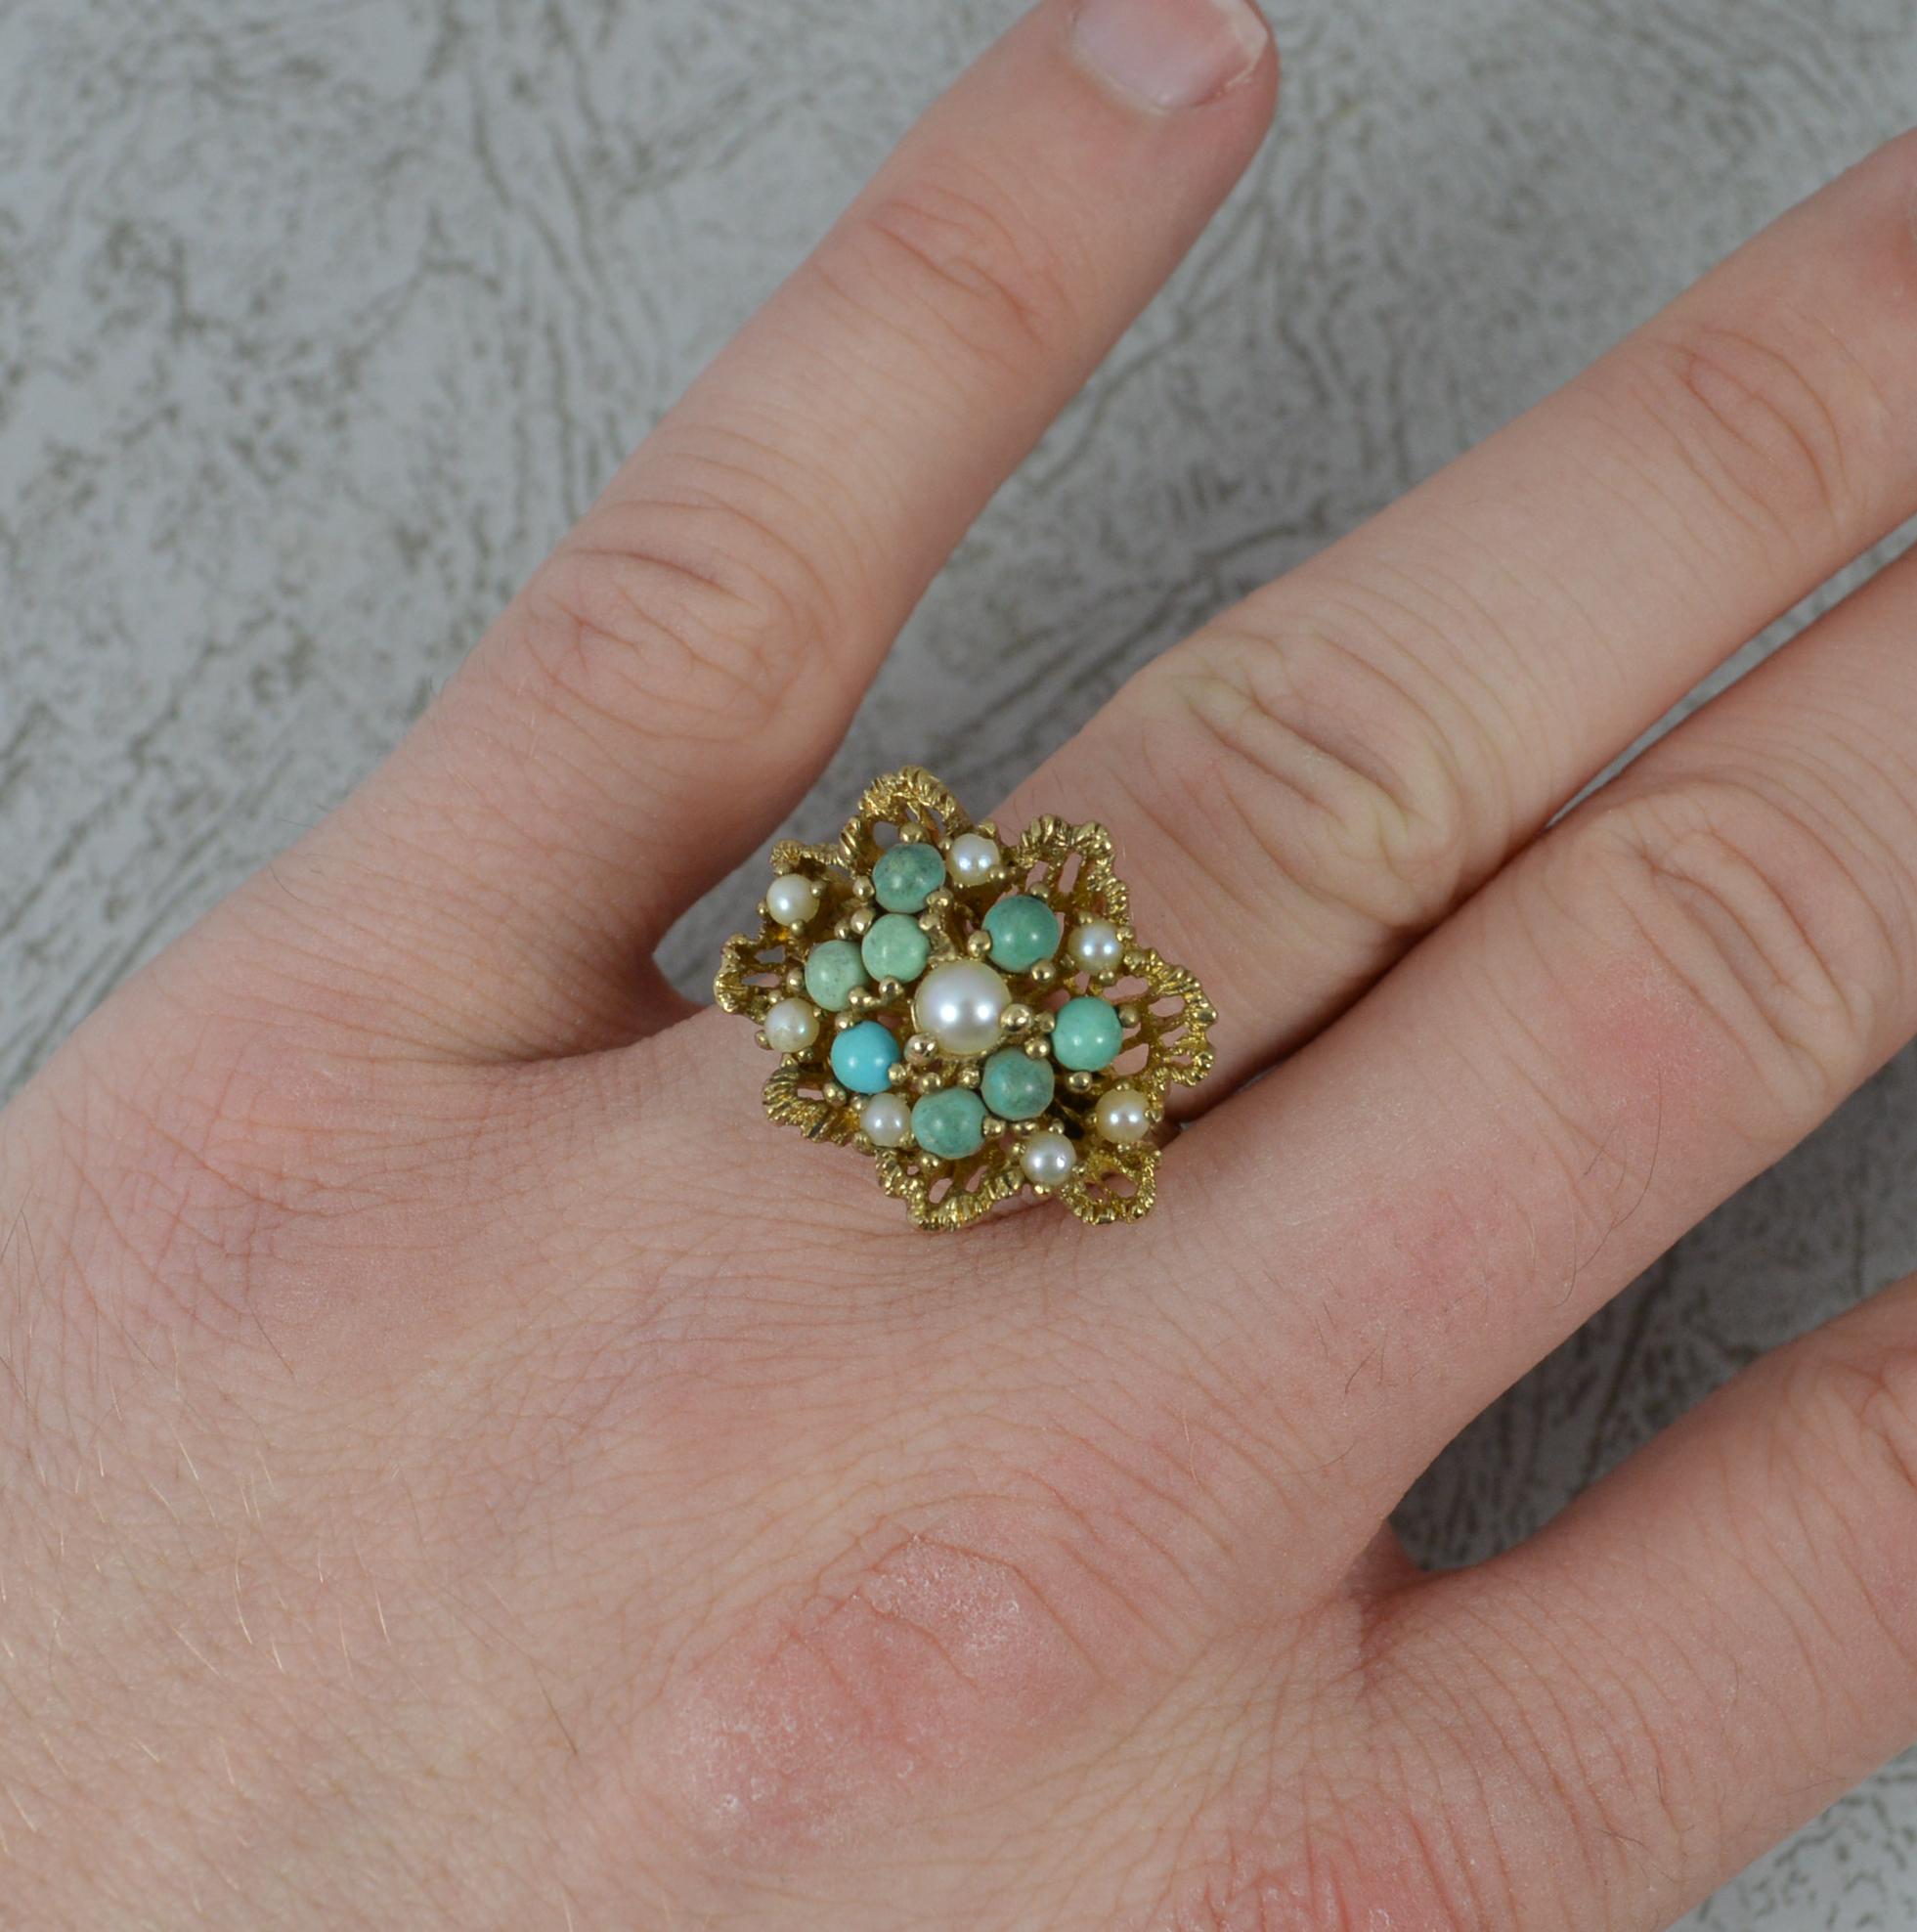 A superb vintage or retro cluster ring.
Solid 9 carat yellow gold example.
Set with pearls and turquoise stones throughout. 
23mm x 19mm cluster head. Protruding 10mm off the finger.

Condition ; Very good. Clean band. Well set stones. Issue